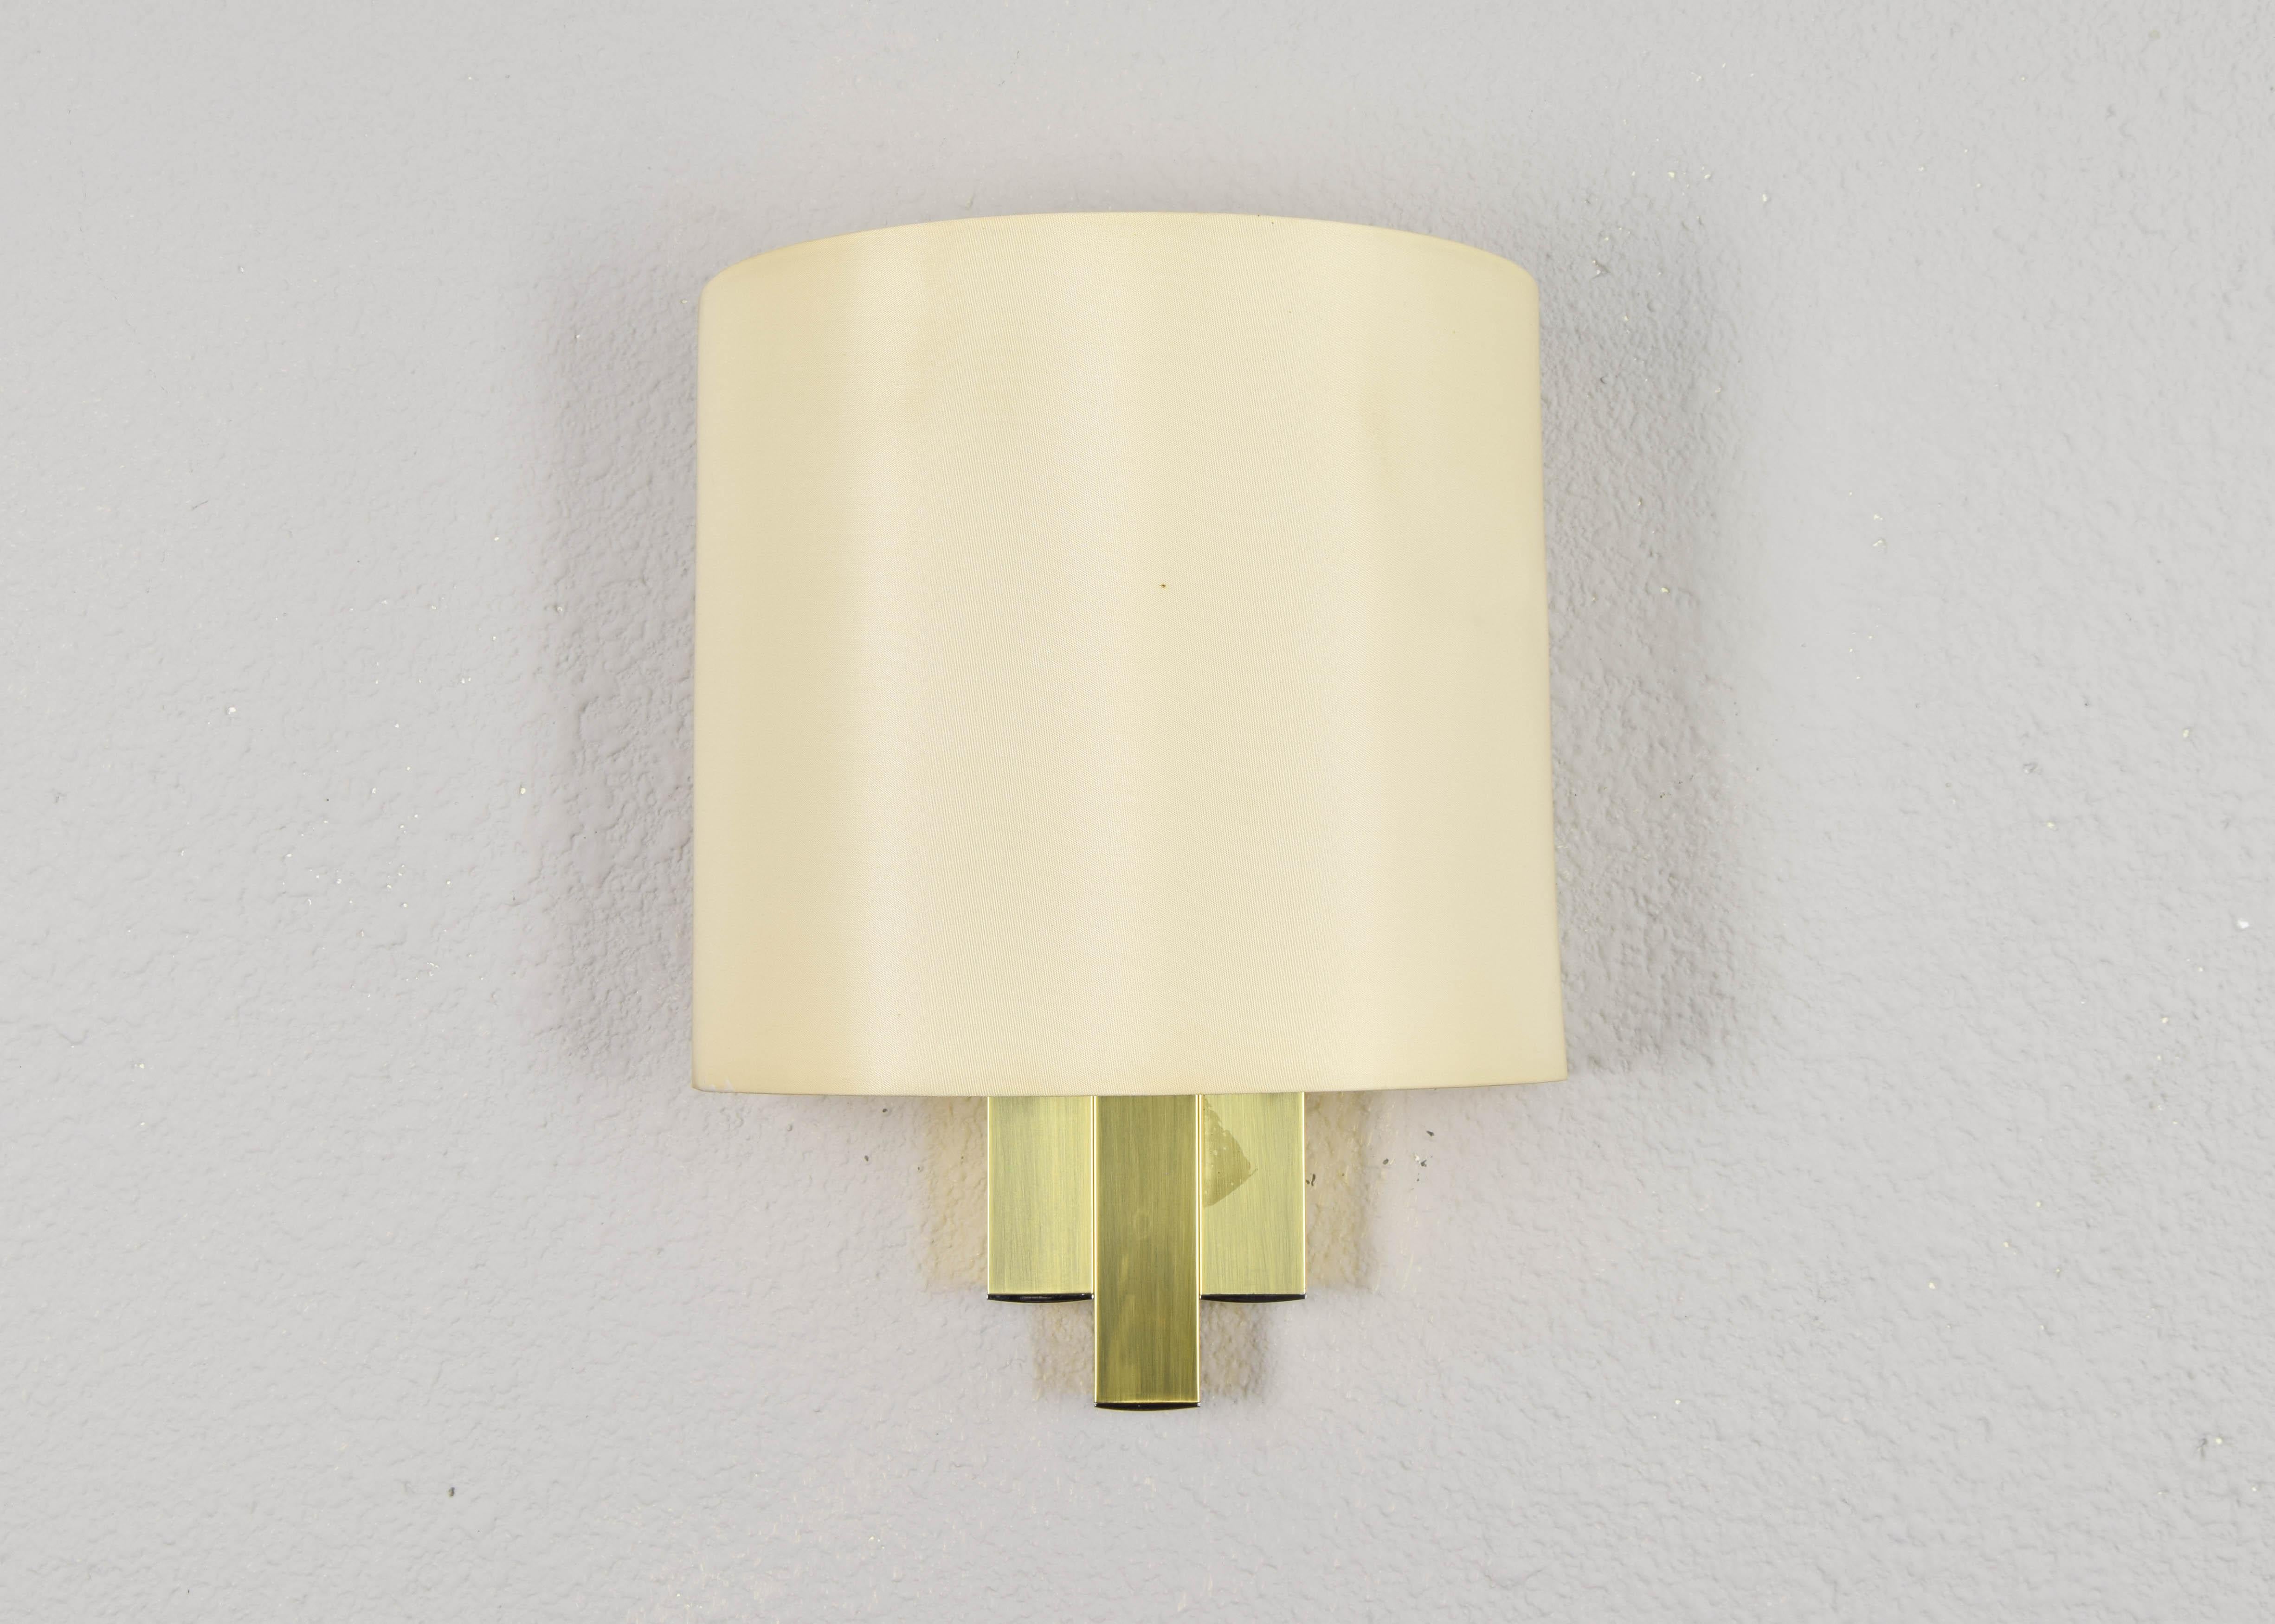 Wonderful and elegance wall light produced by BD Lumica in the 1970s in Spain.

Body composed of golden steel bars and finished in brass with chrome finishes at the ends and beige satin lampshade.
Provided with a sockets for E27 bulbs, electrical